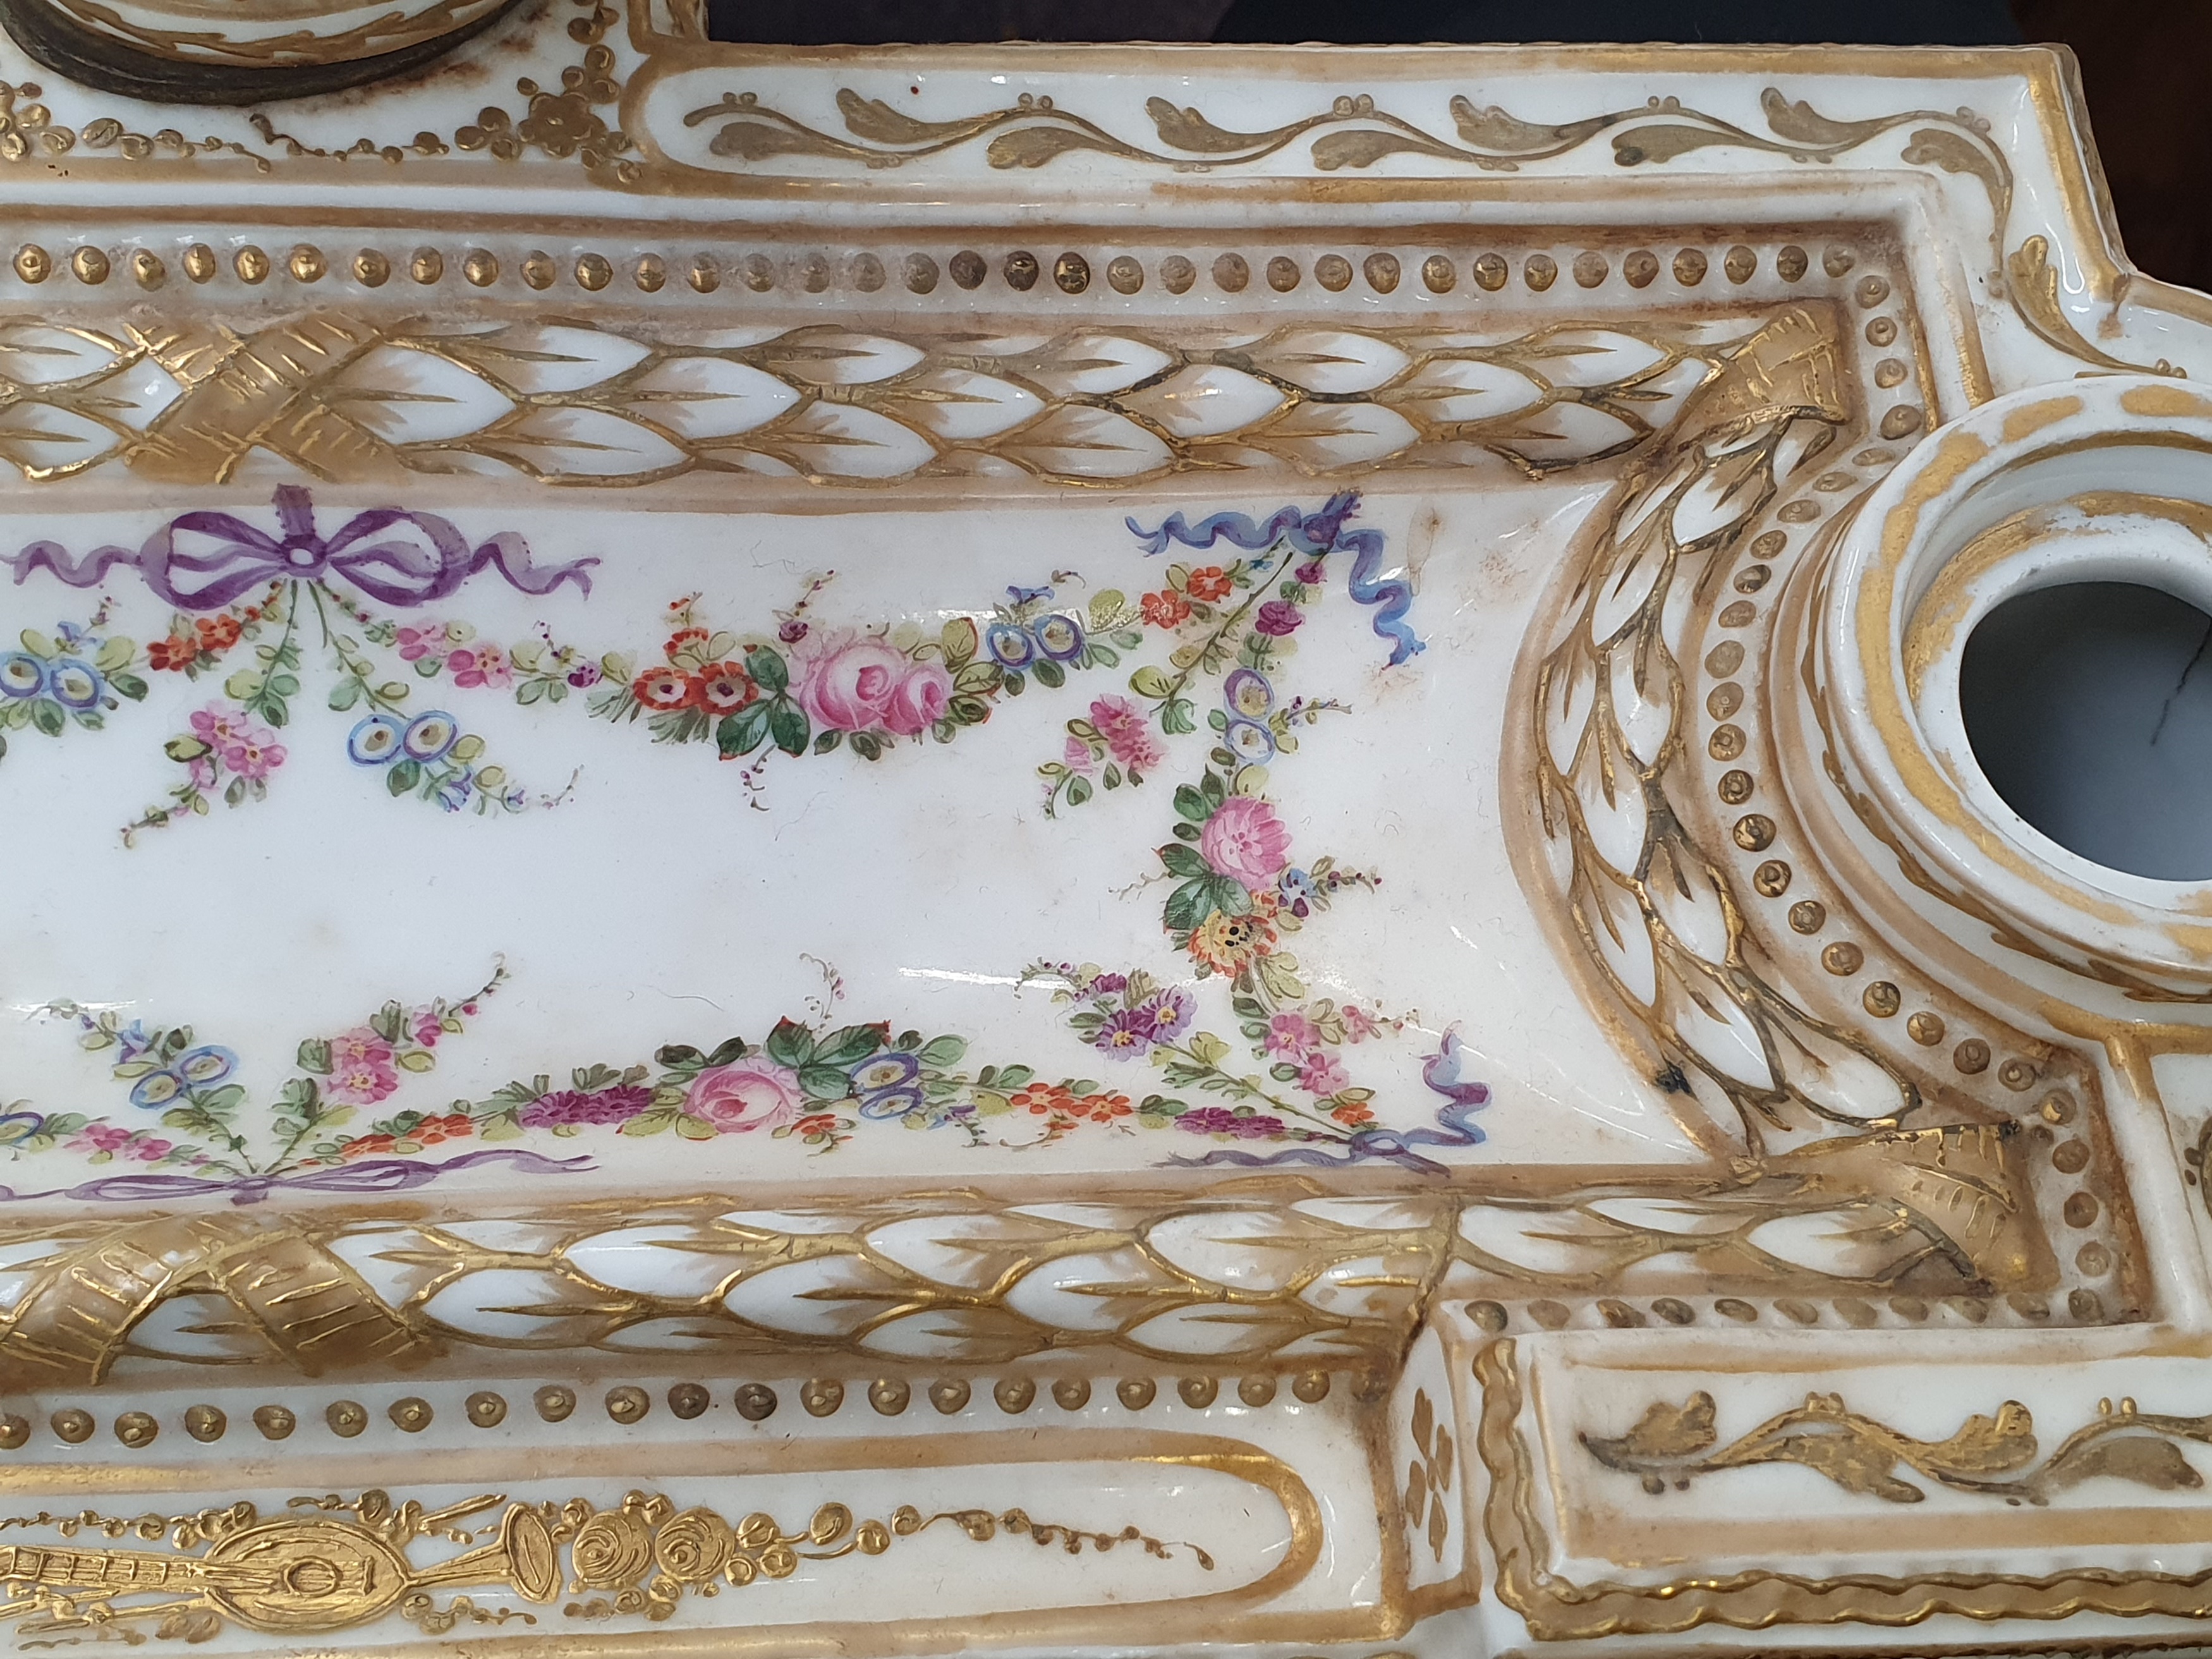 A FRENCH PARIS PORCELAIN PEN TRAY OF NEOCLASSICAL DESIGN, LATE 19TH CENTURY - Image 19 of 22